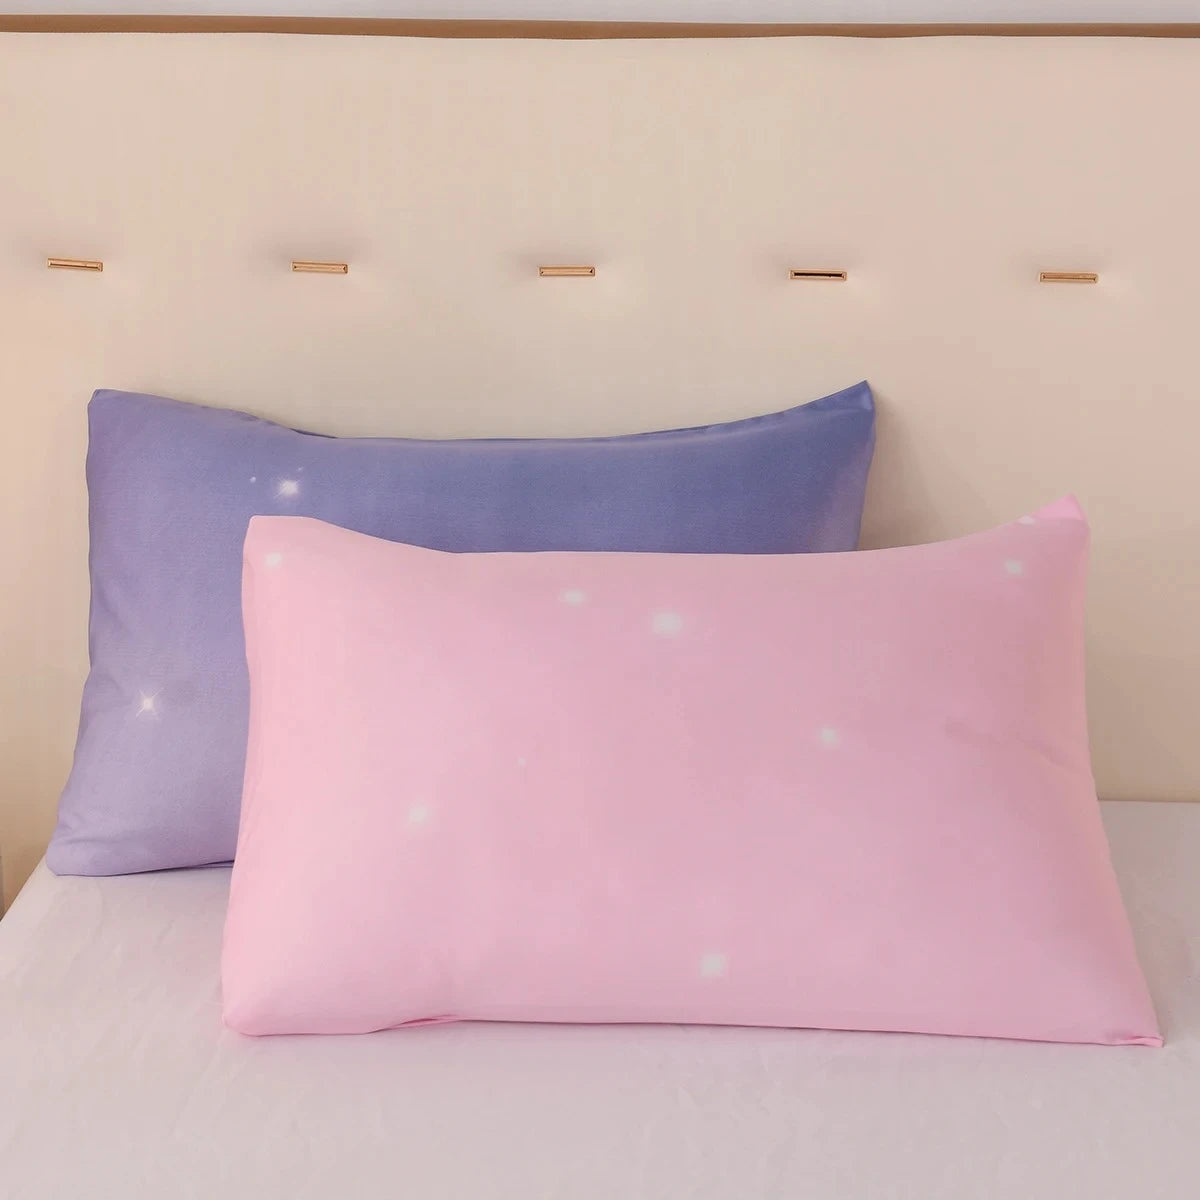 Two pillows fitted with pink and purple pillow covers